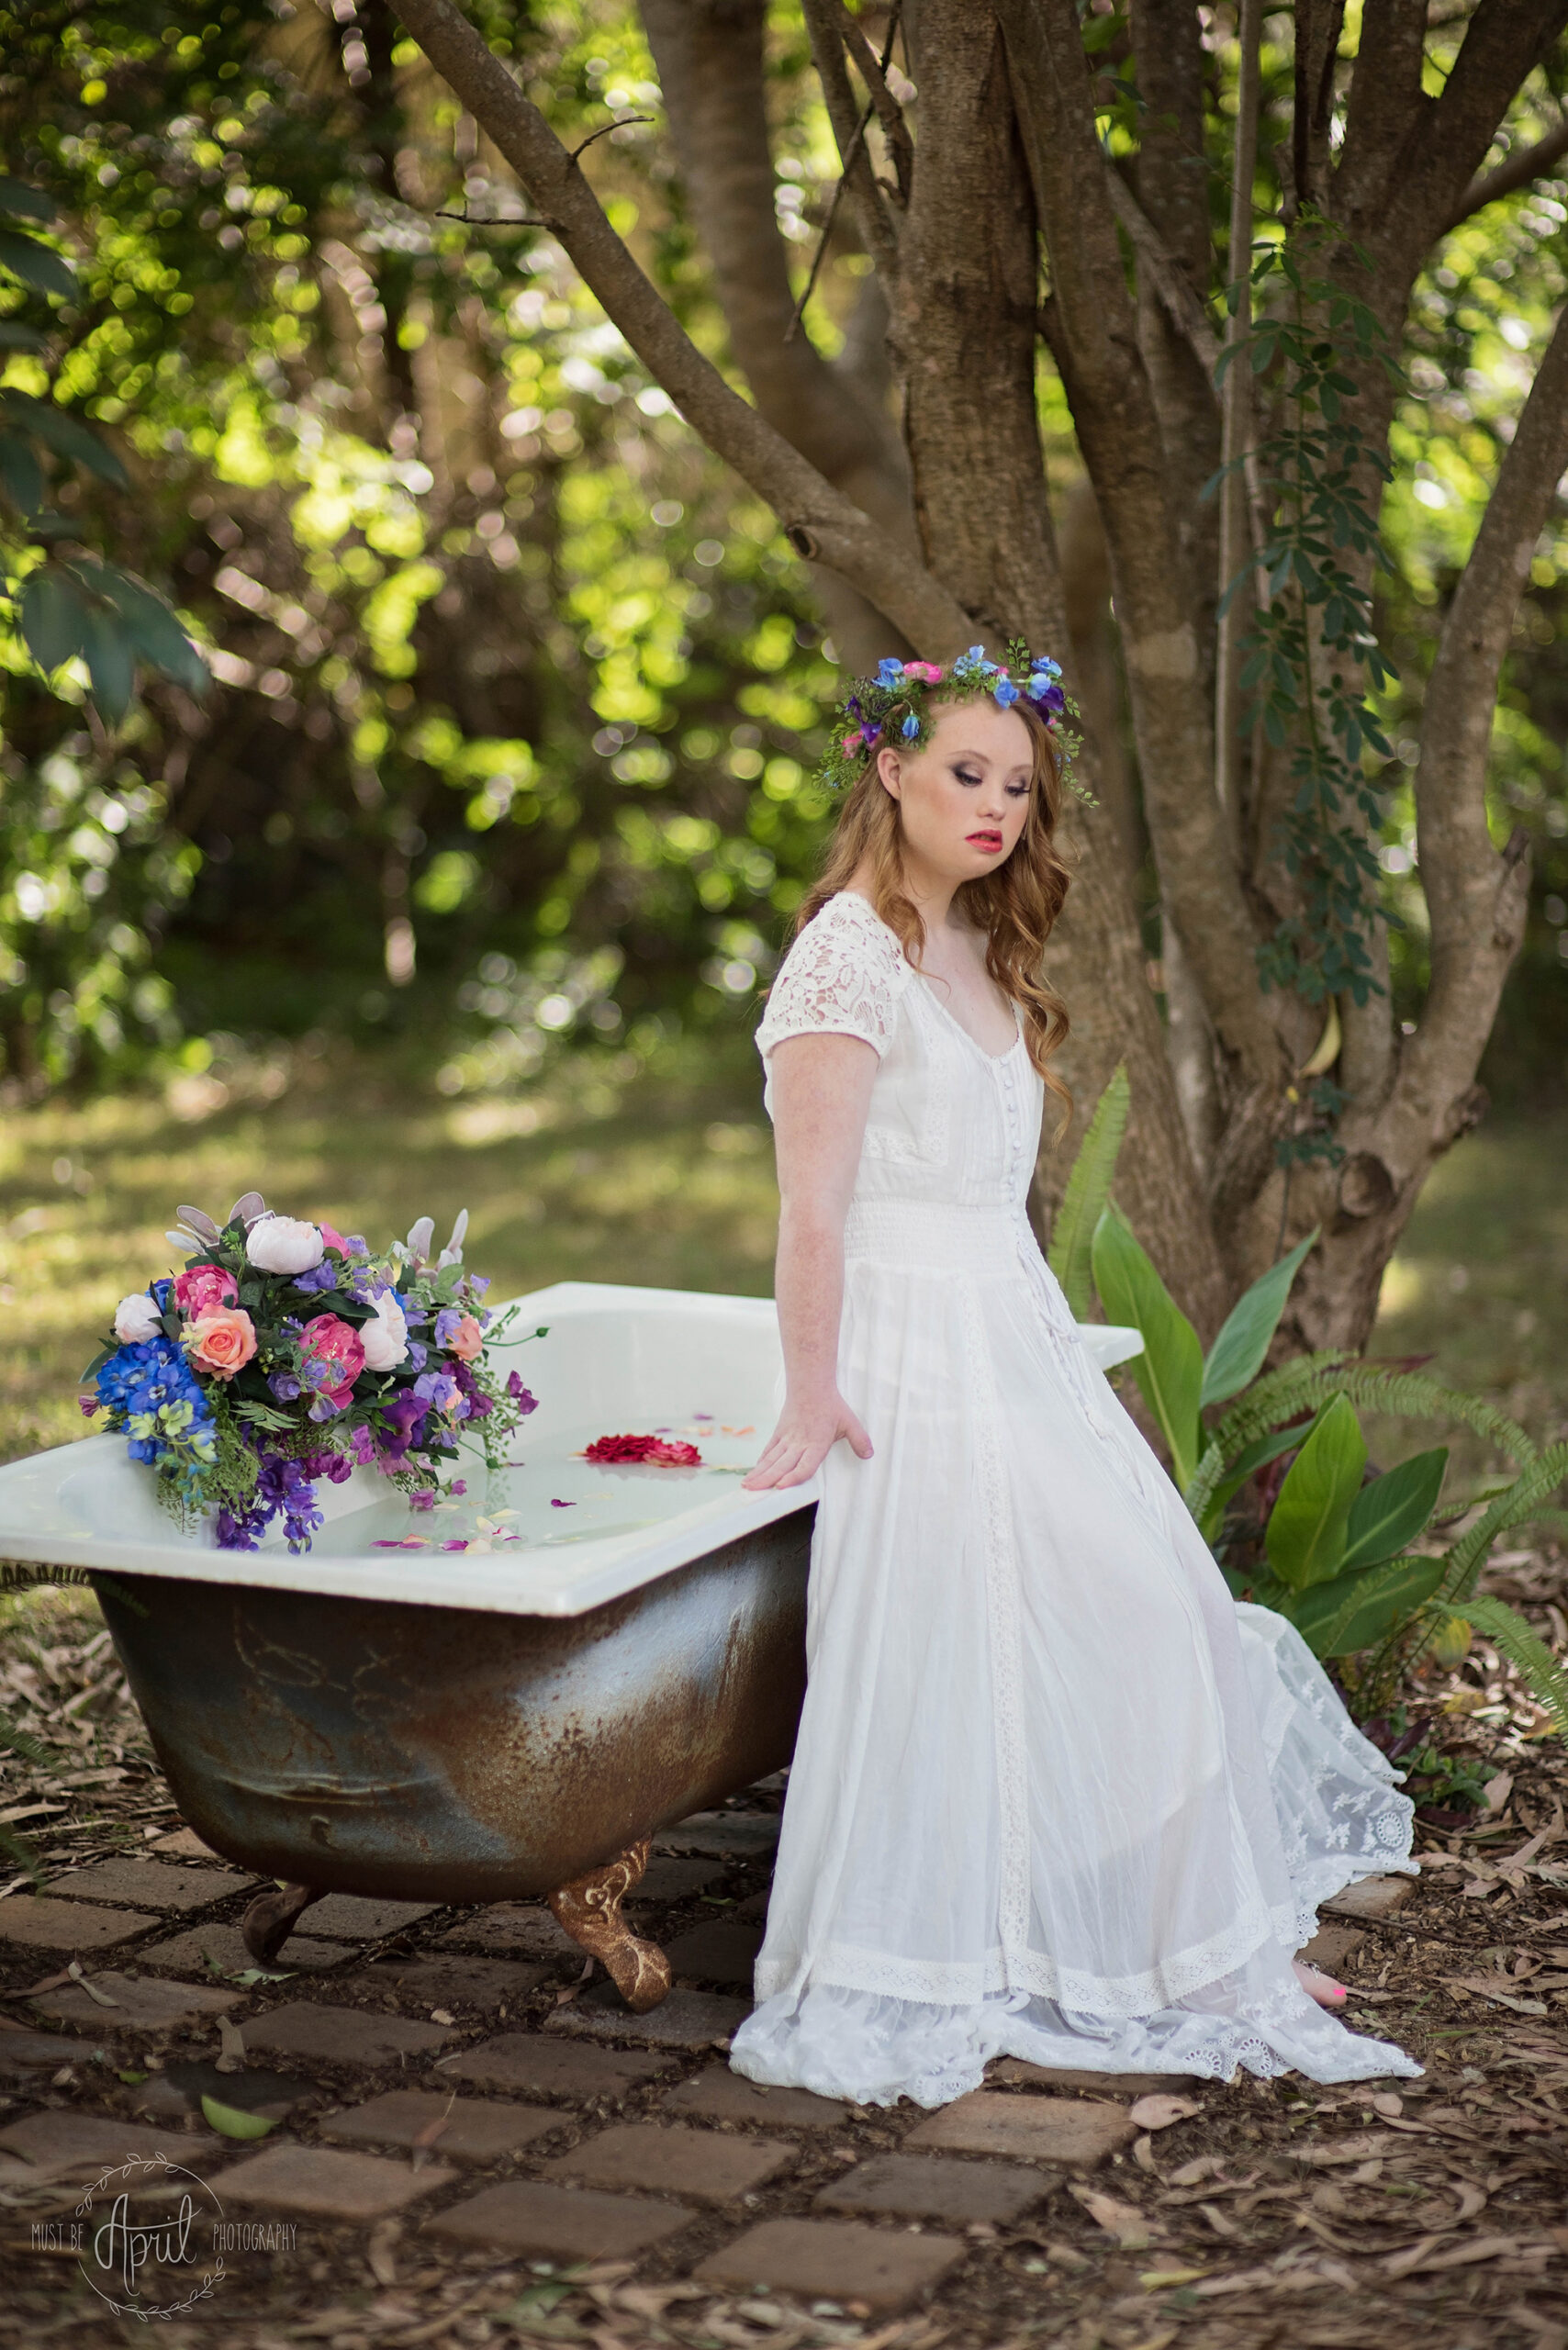 Must_Be_April_Photography_Milk-Bath-Styled-Shoot_001